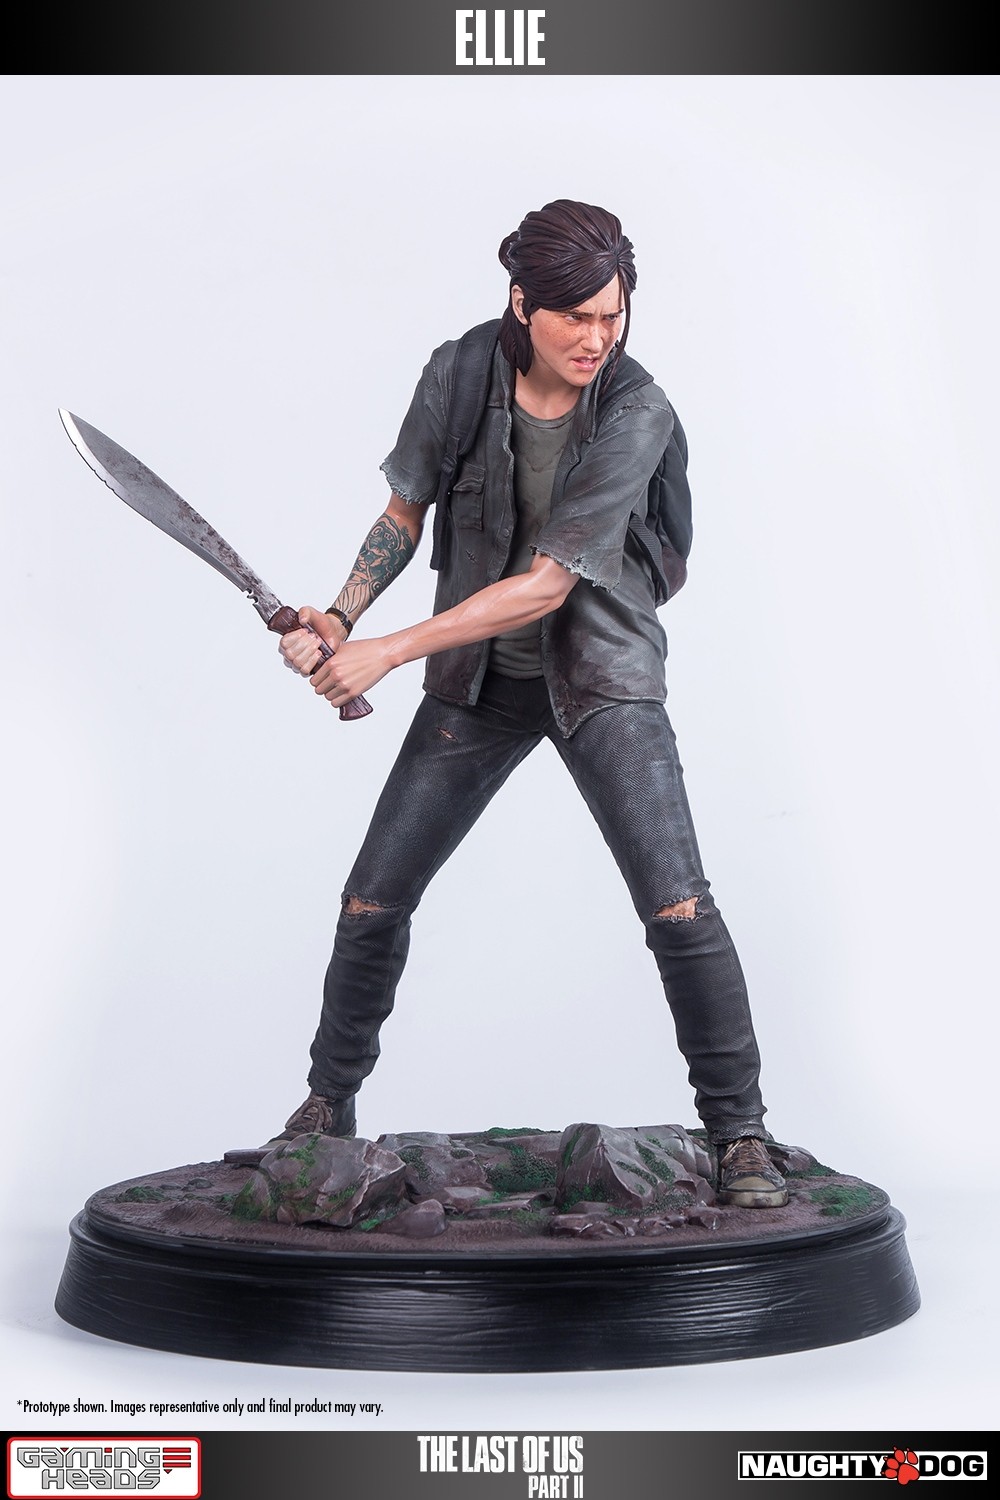 gaming statues for sale